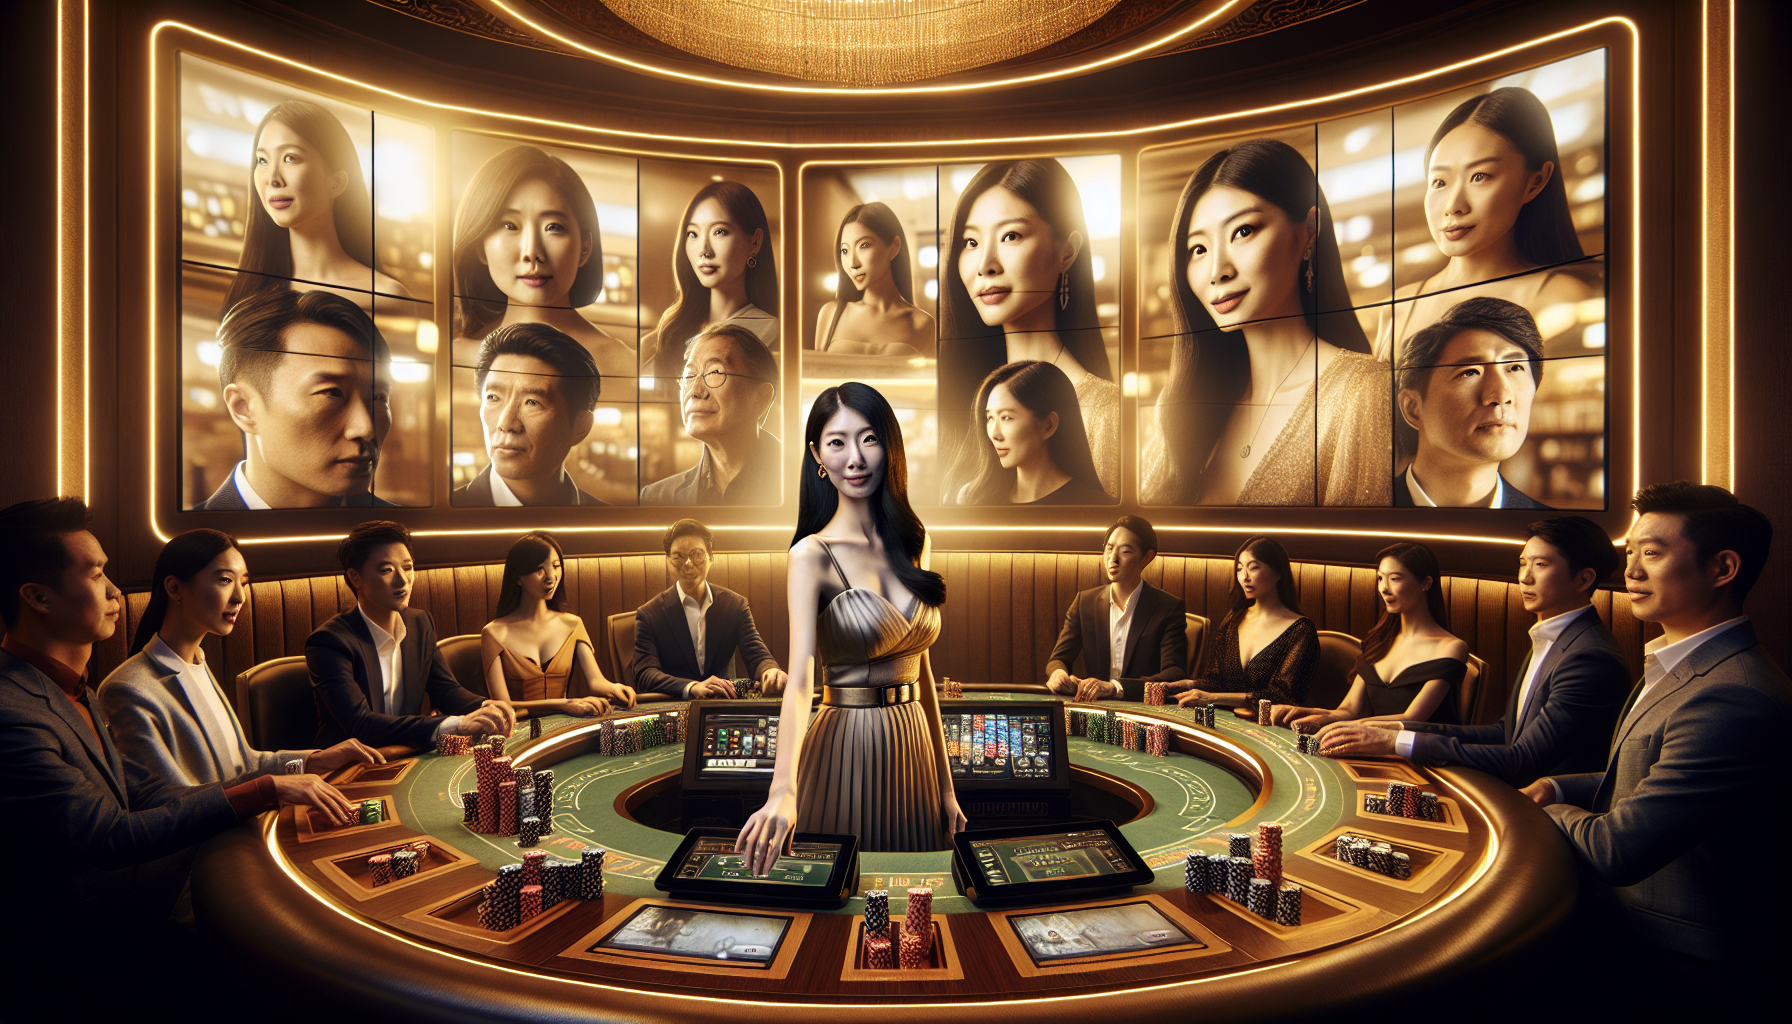 Illustration of a live dealer interacting with players at an online casino